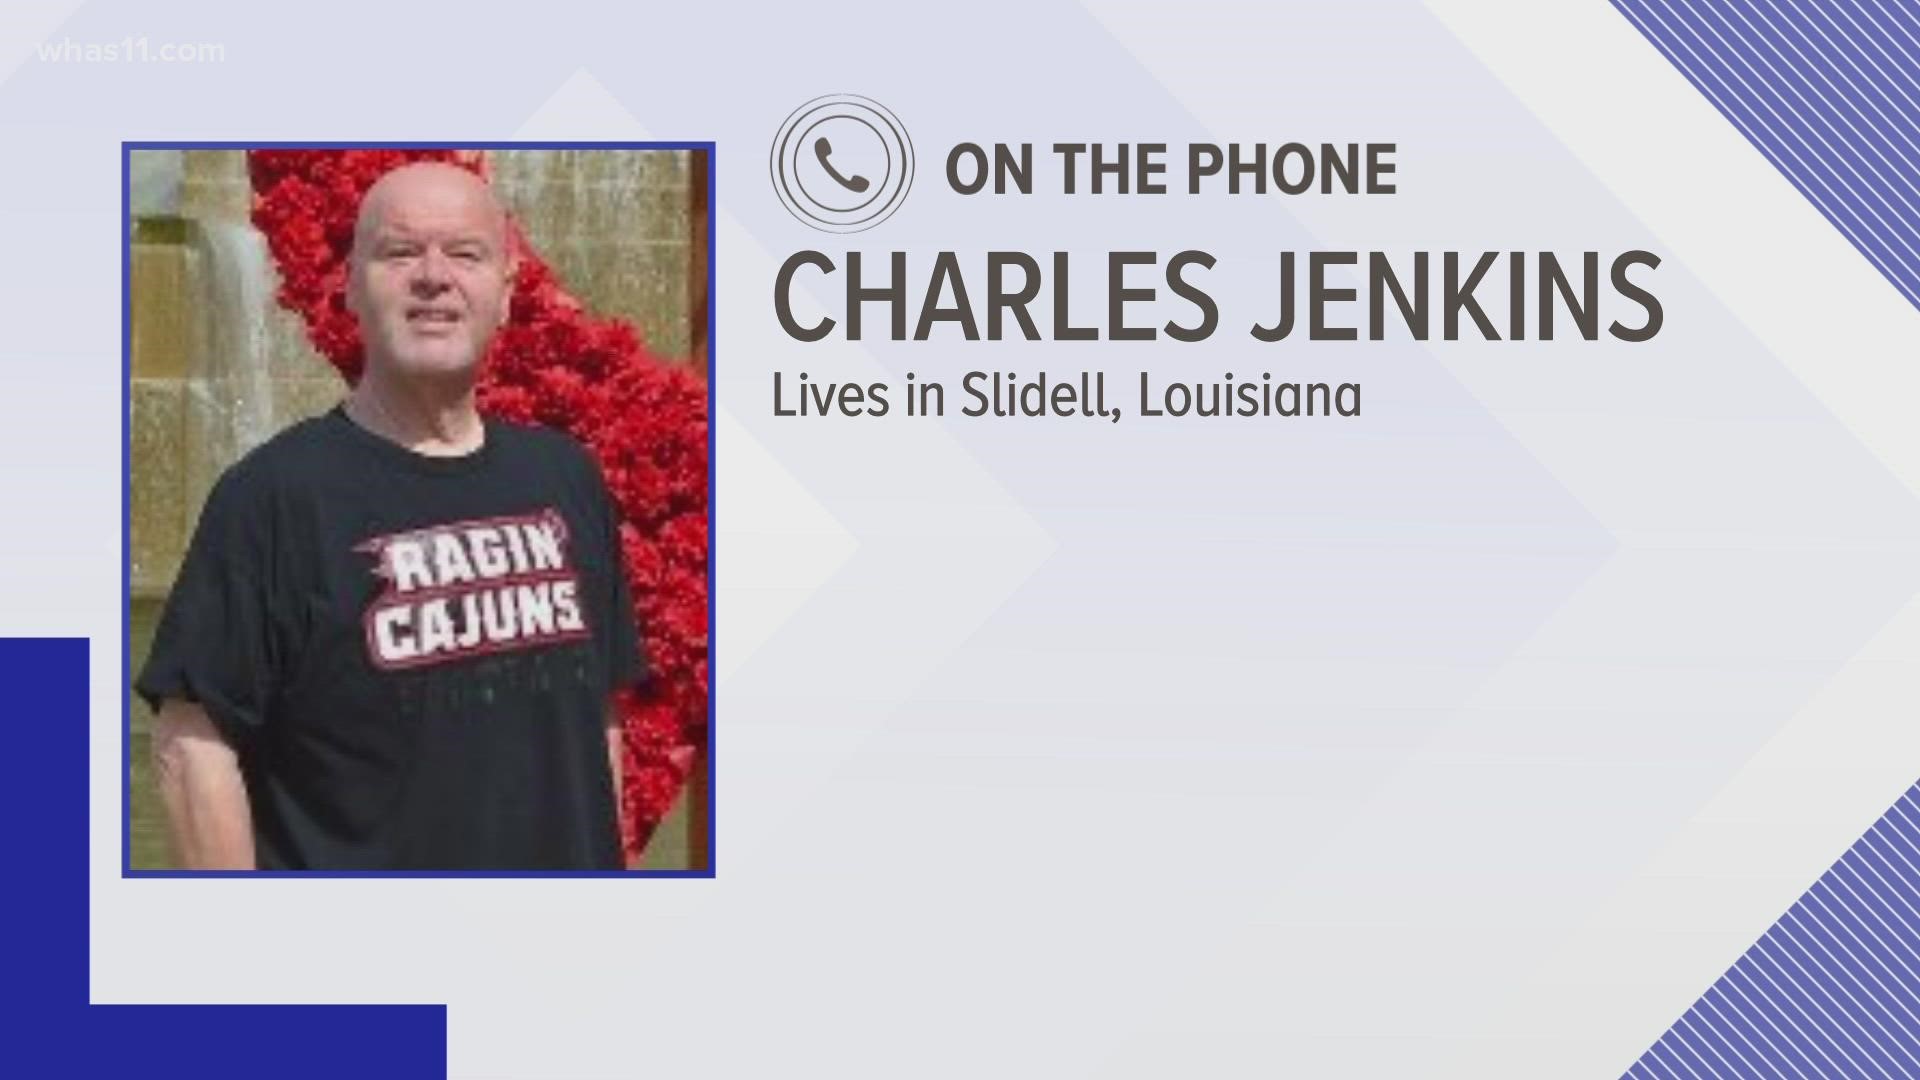 Charles Jenkins tells WHAS11 News about his journey traveling down flooded roadways to get cell service and other resources.